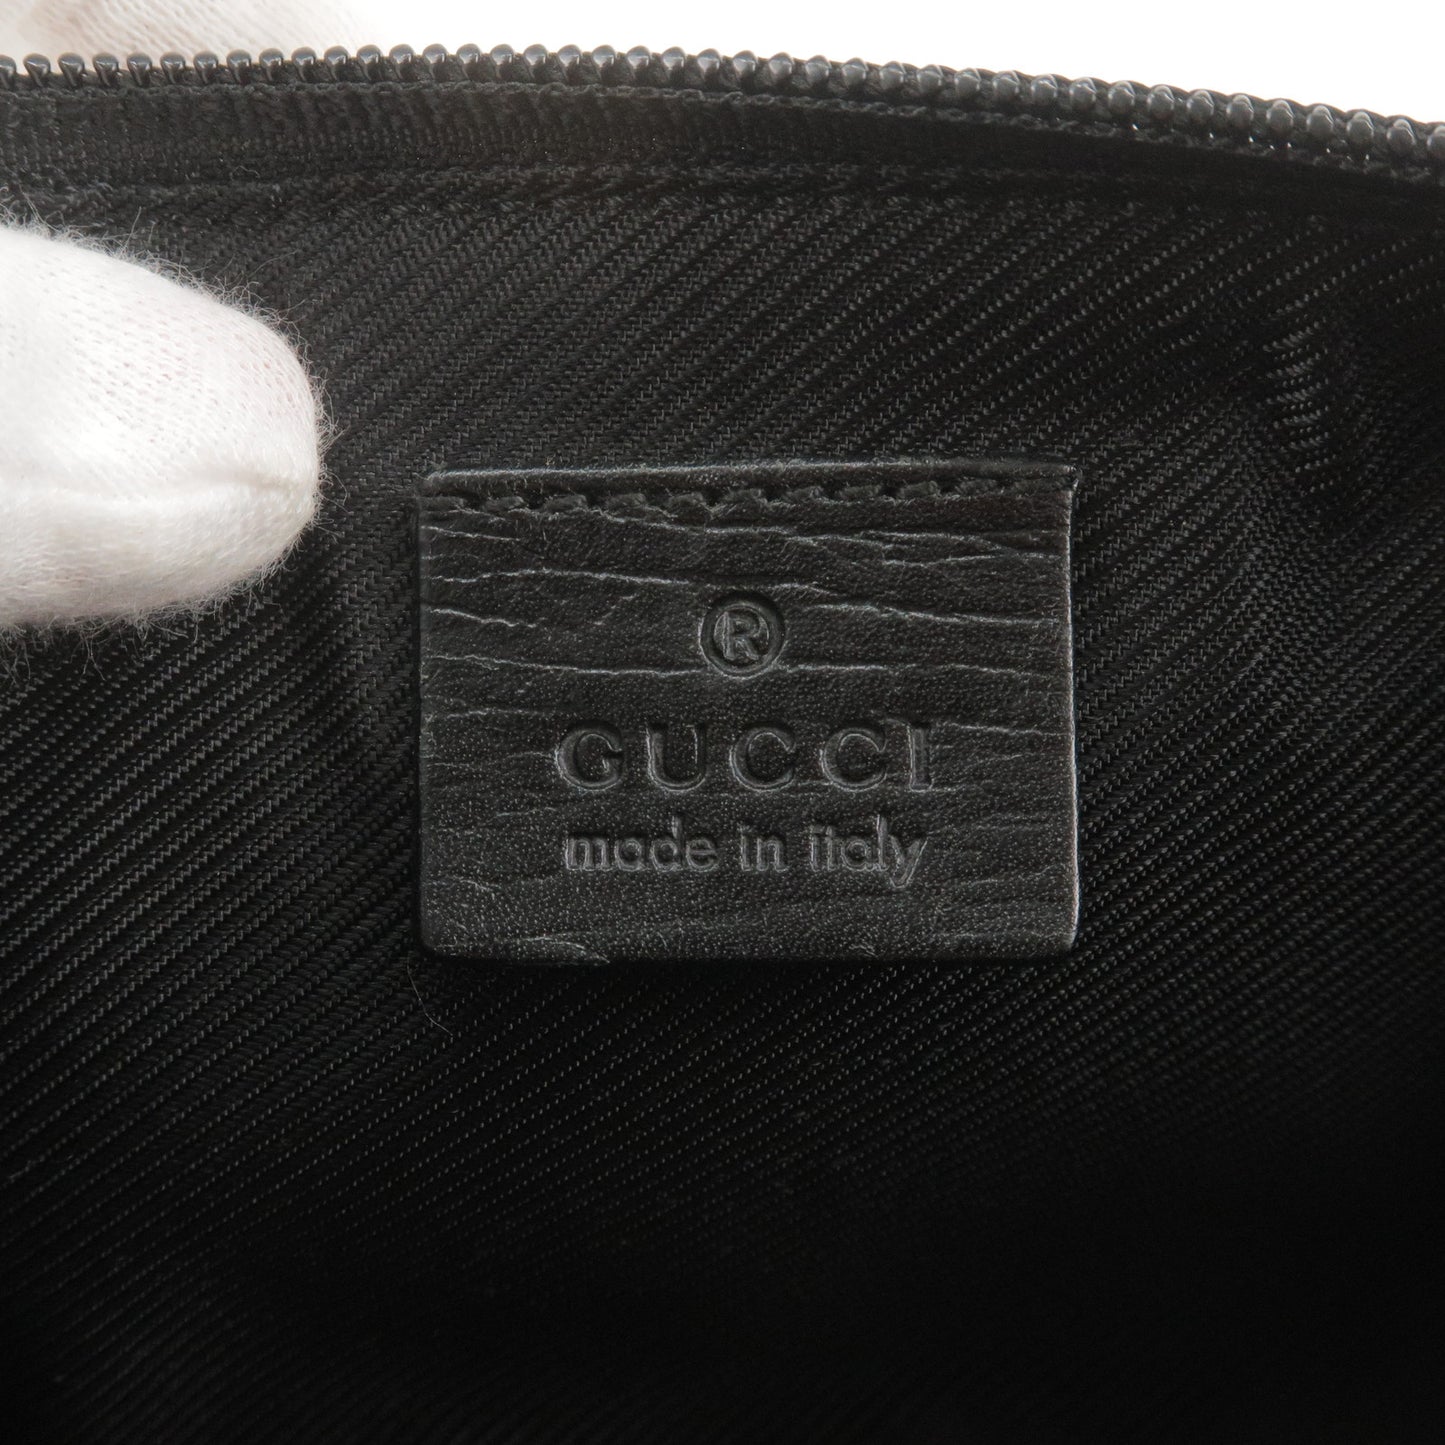 GUCCI GG Canvas Leather Boat Bag Hand Bag Black 141809